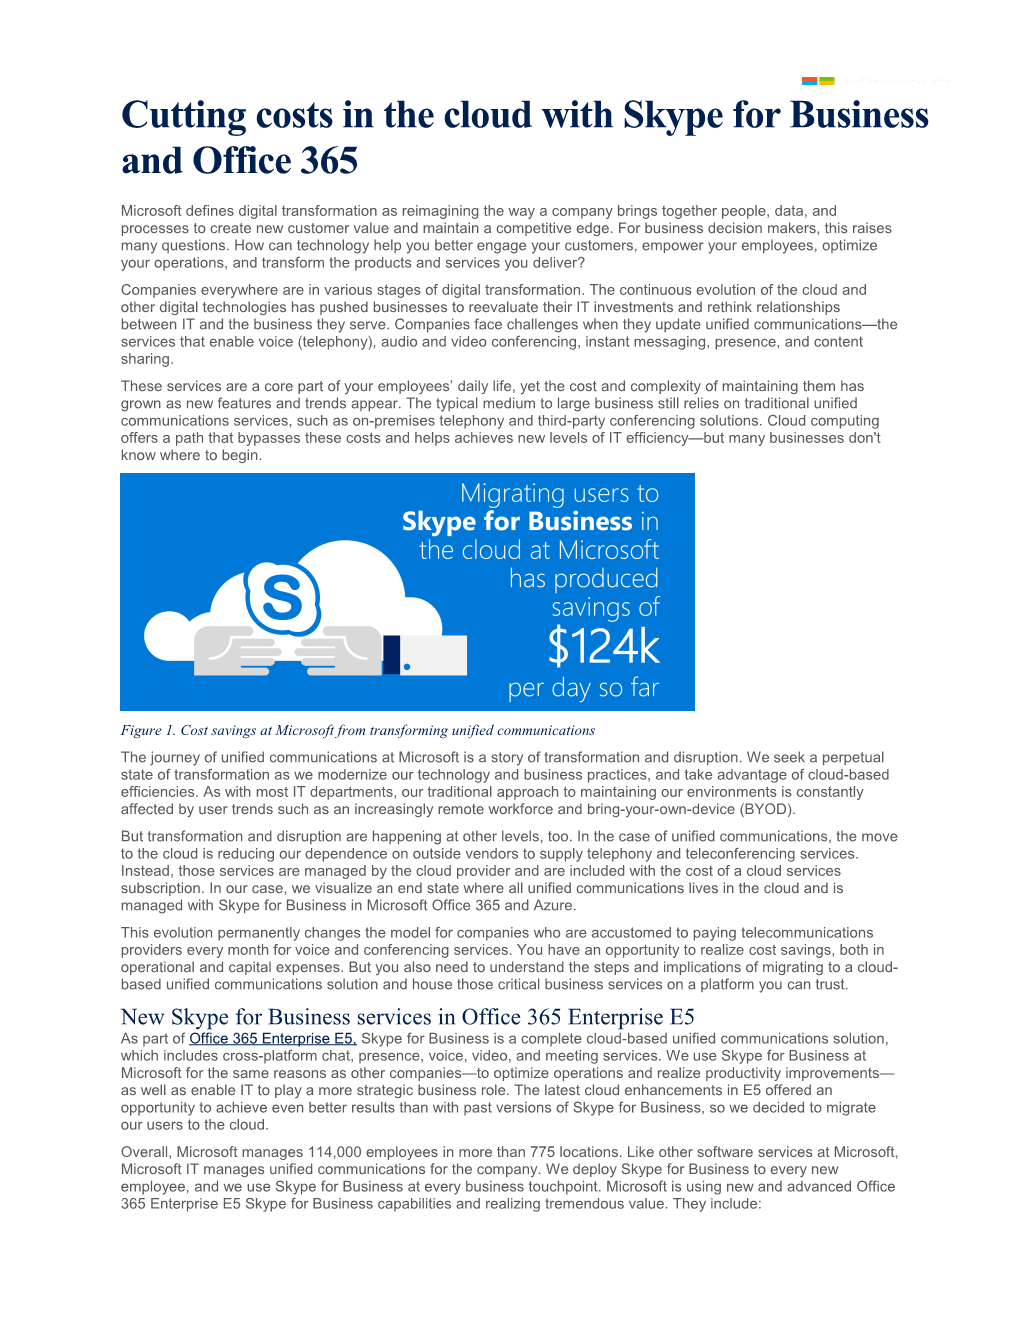 Cutting Costs in the Cloud with Skype for Business and Office 365